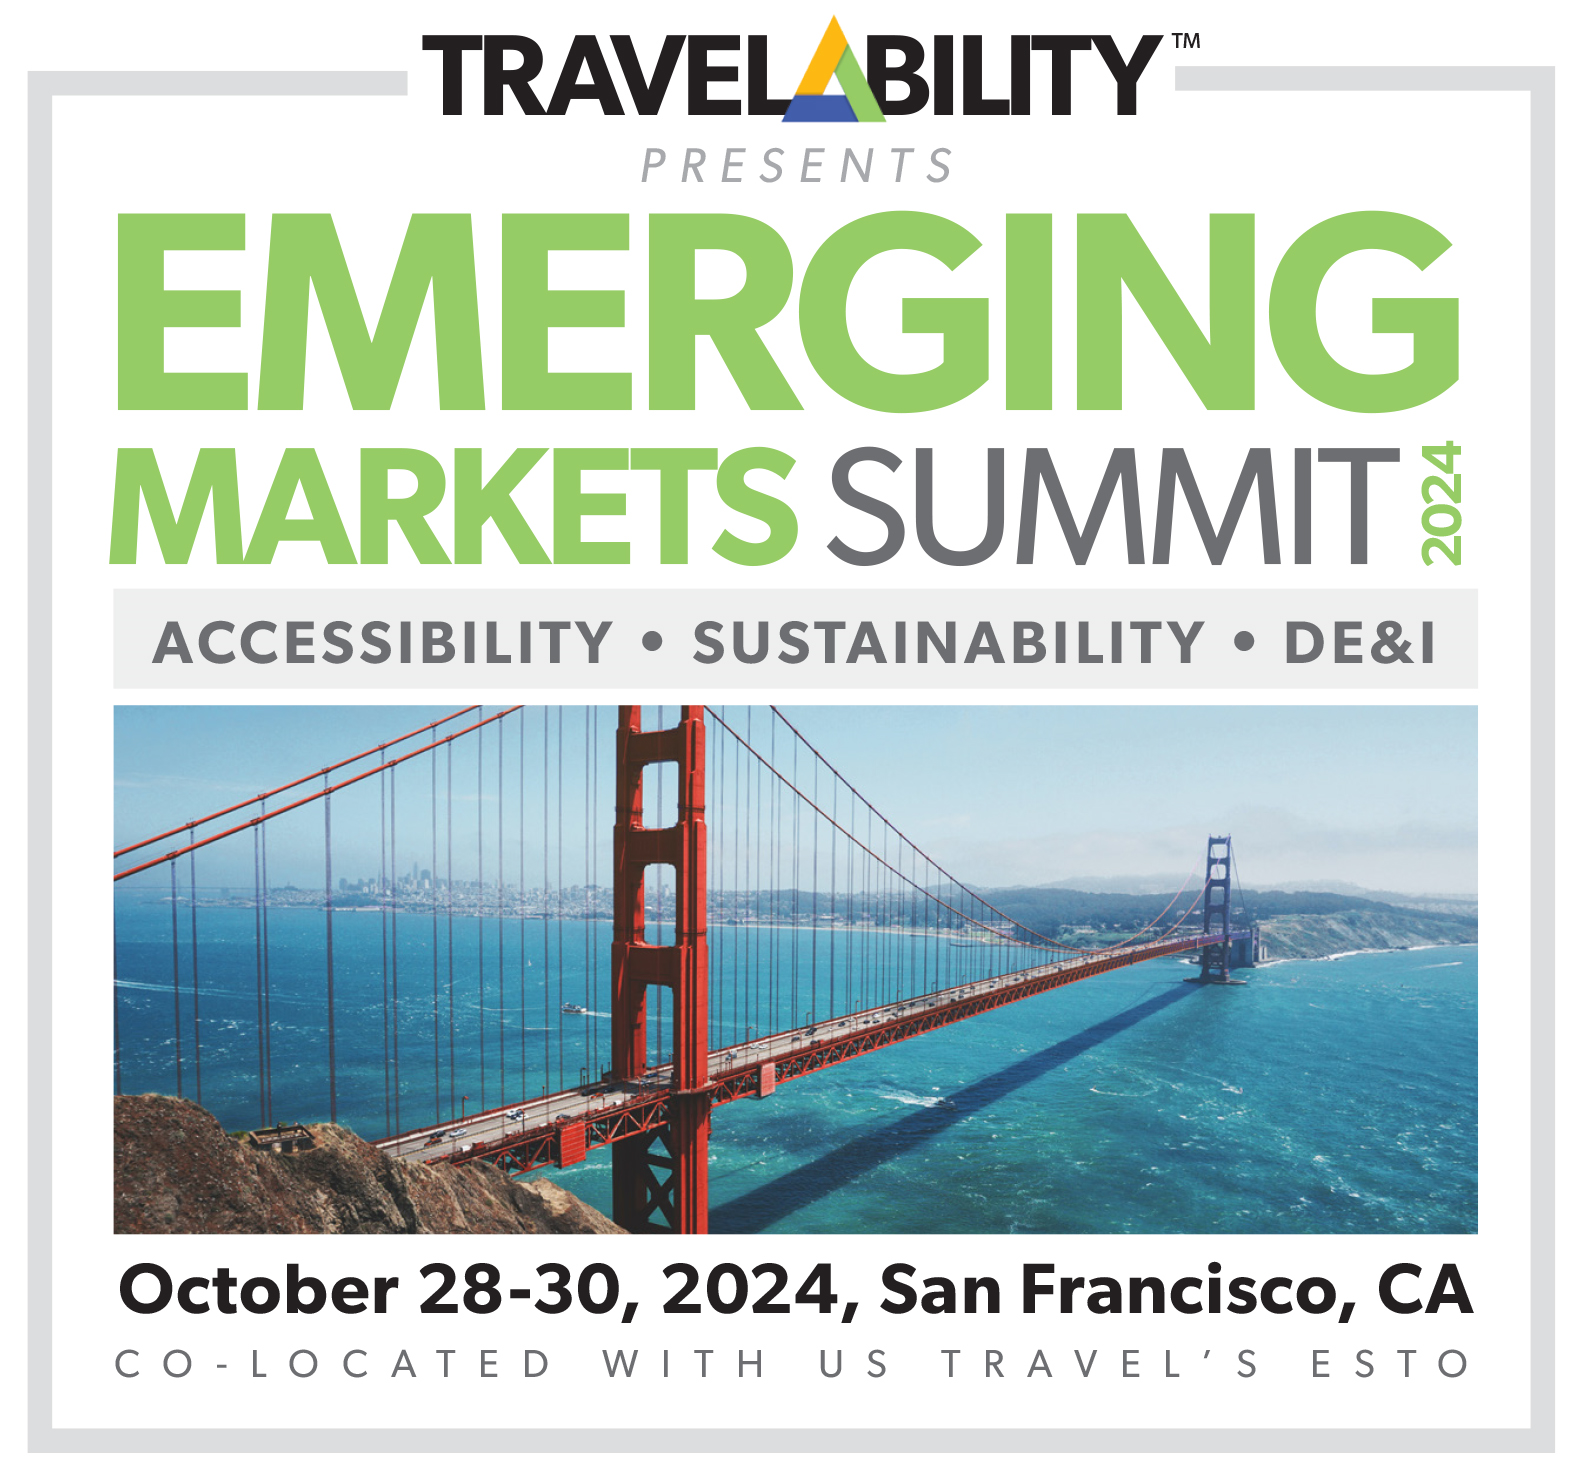 Travel Ability Summit Accessible Destinations For Everyone 